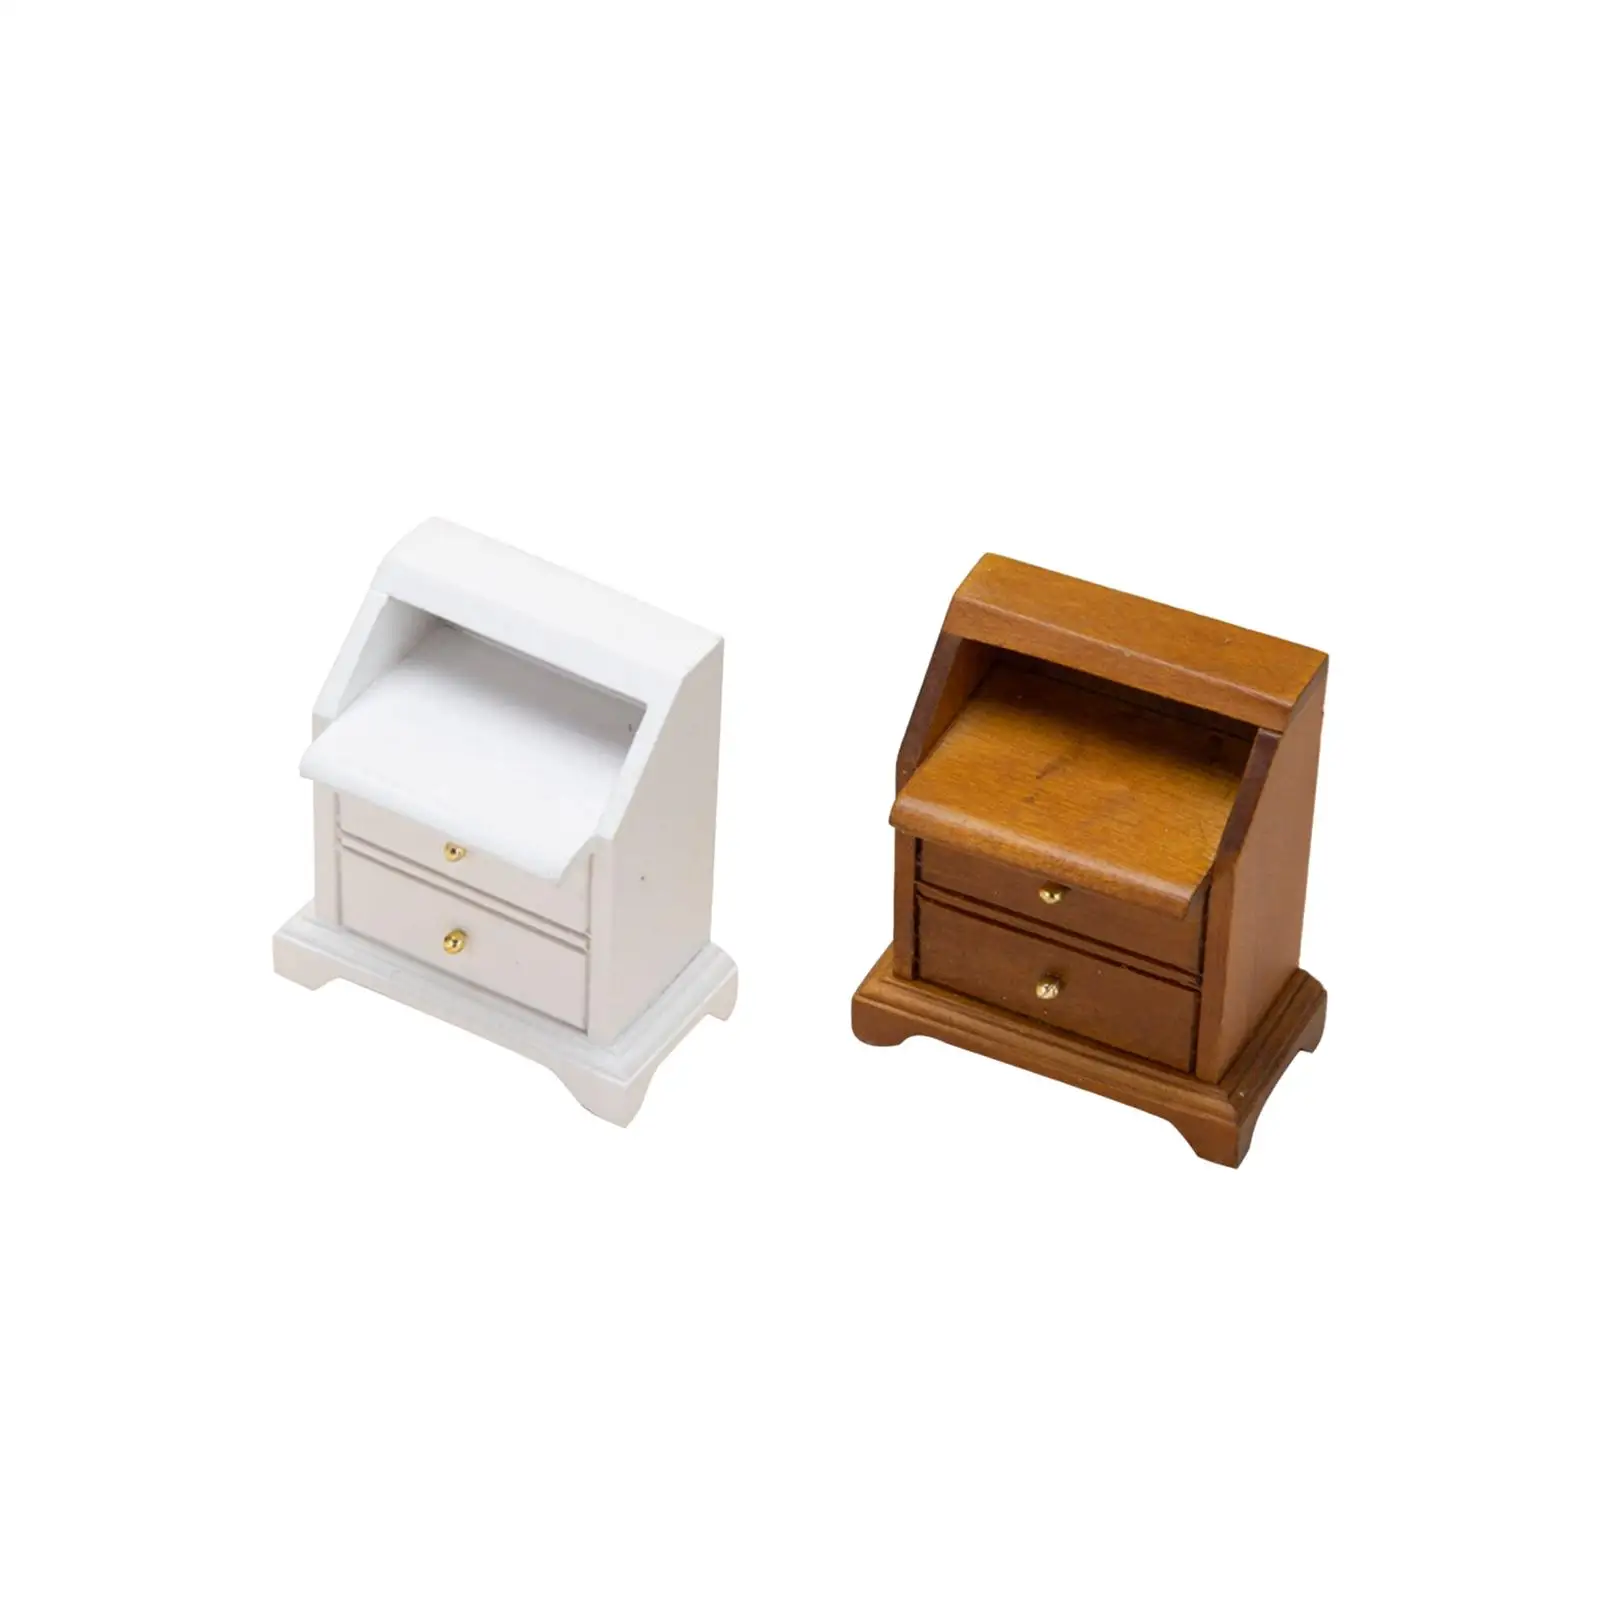 1/12 Scale Dollhouse NightStand Storage Stand Wooden Model 8.7x3.7x15cm Smooth Polishing